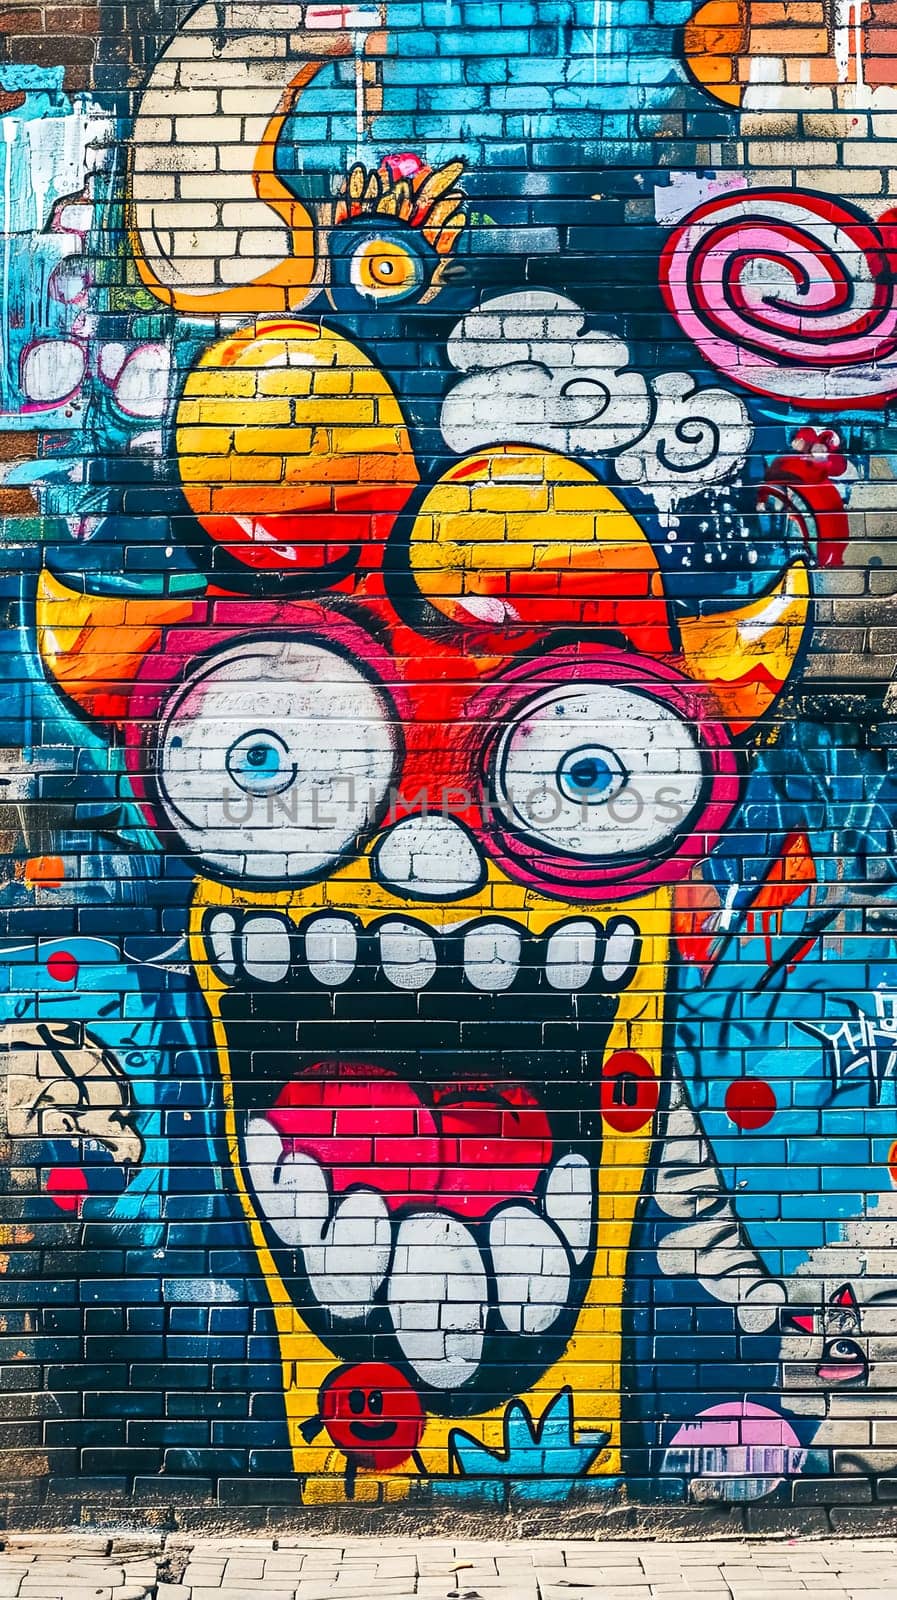 graffiti piece on a brick wall featuring an eccentric character with large, round eyes and a whimsical expression, vertical